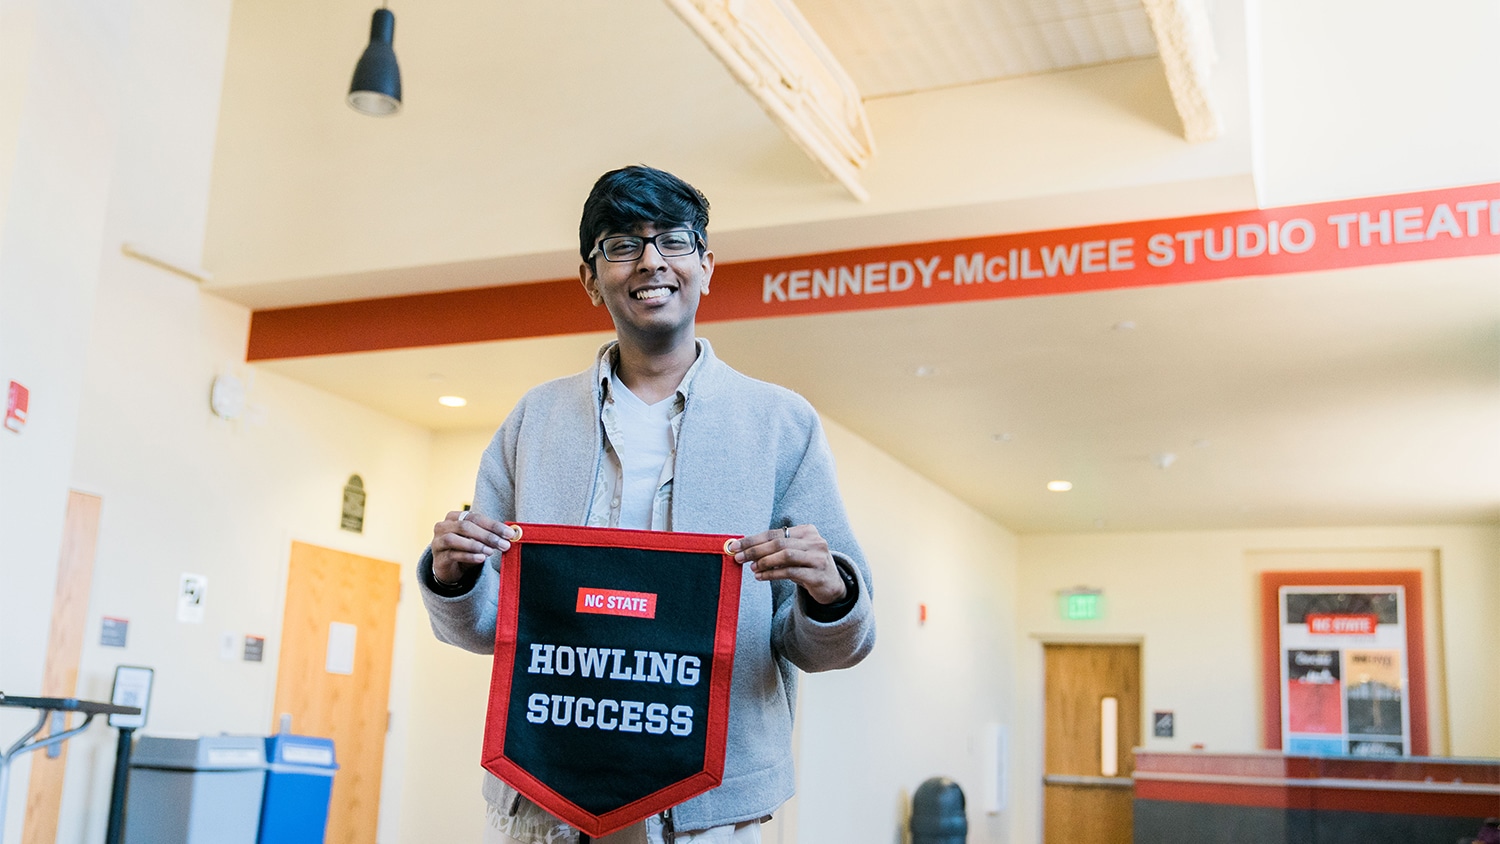 Kiran Soma holds a red, white and black banner that reads "Howling Success" in the lobby of Thompson Theatre